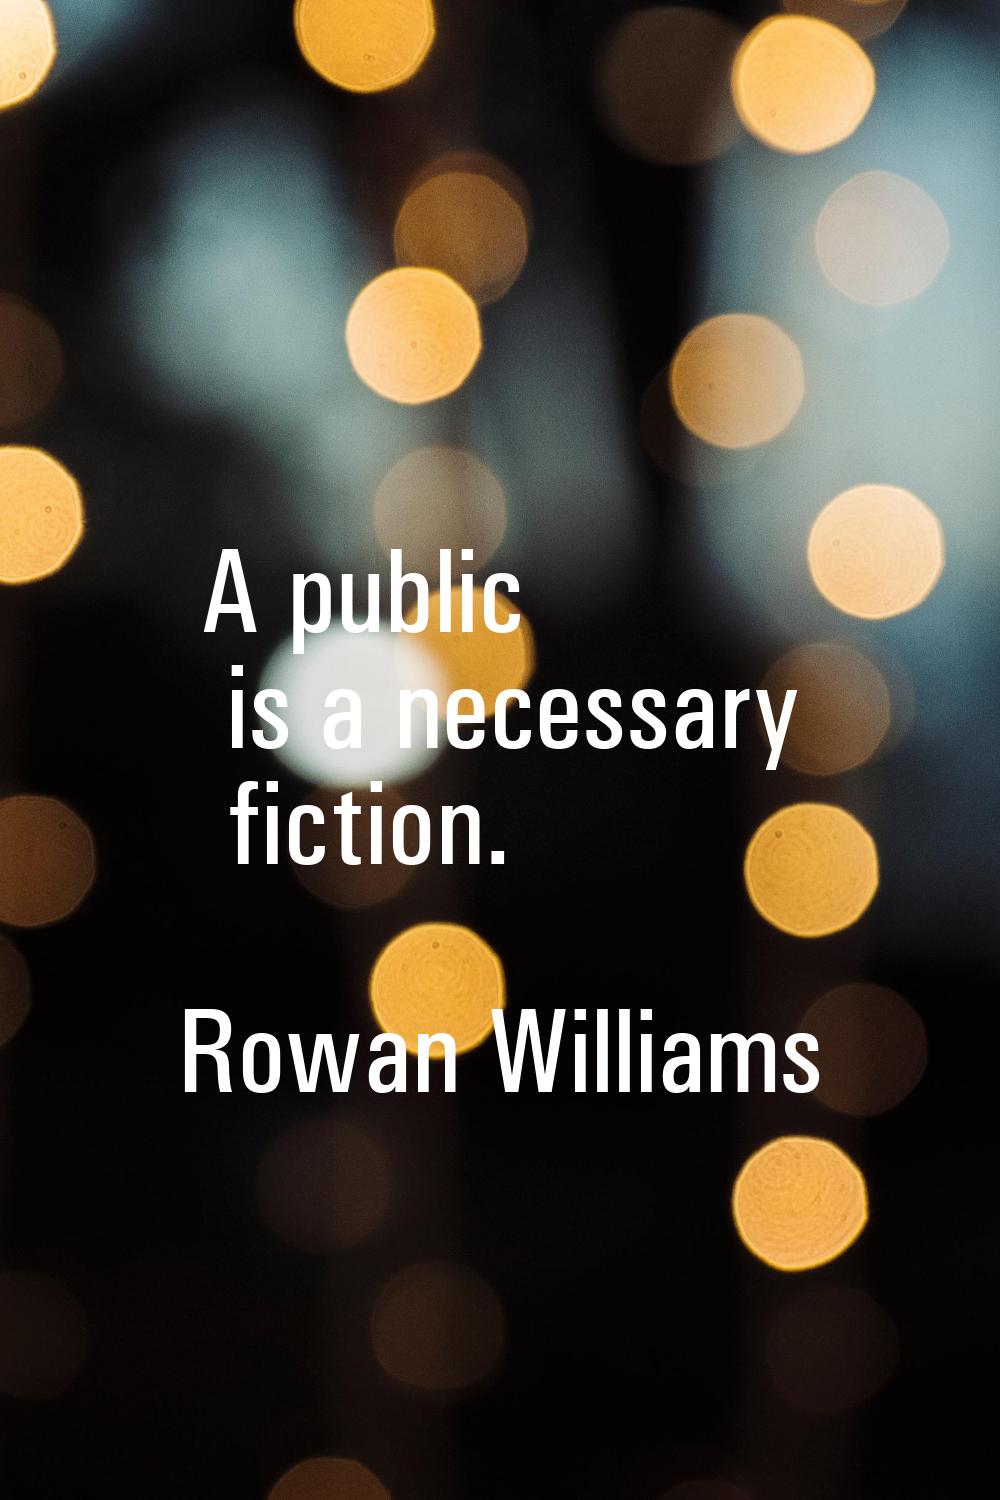 A public is a necessary fiction.